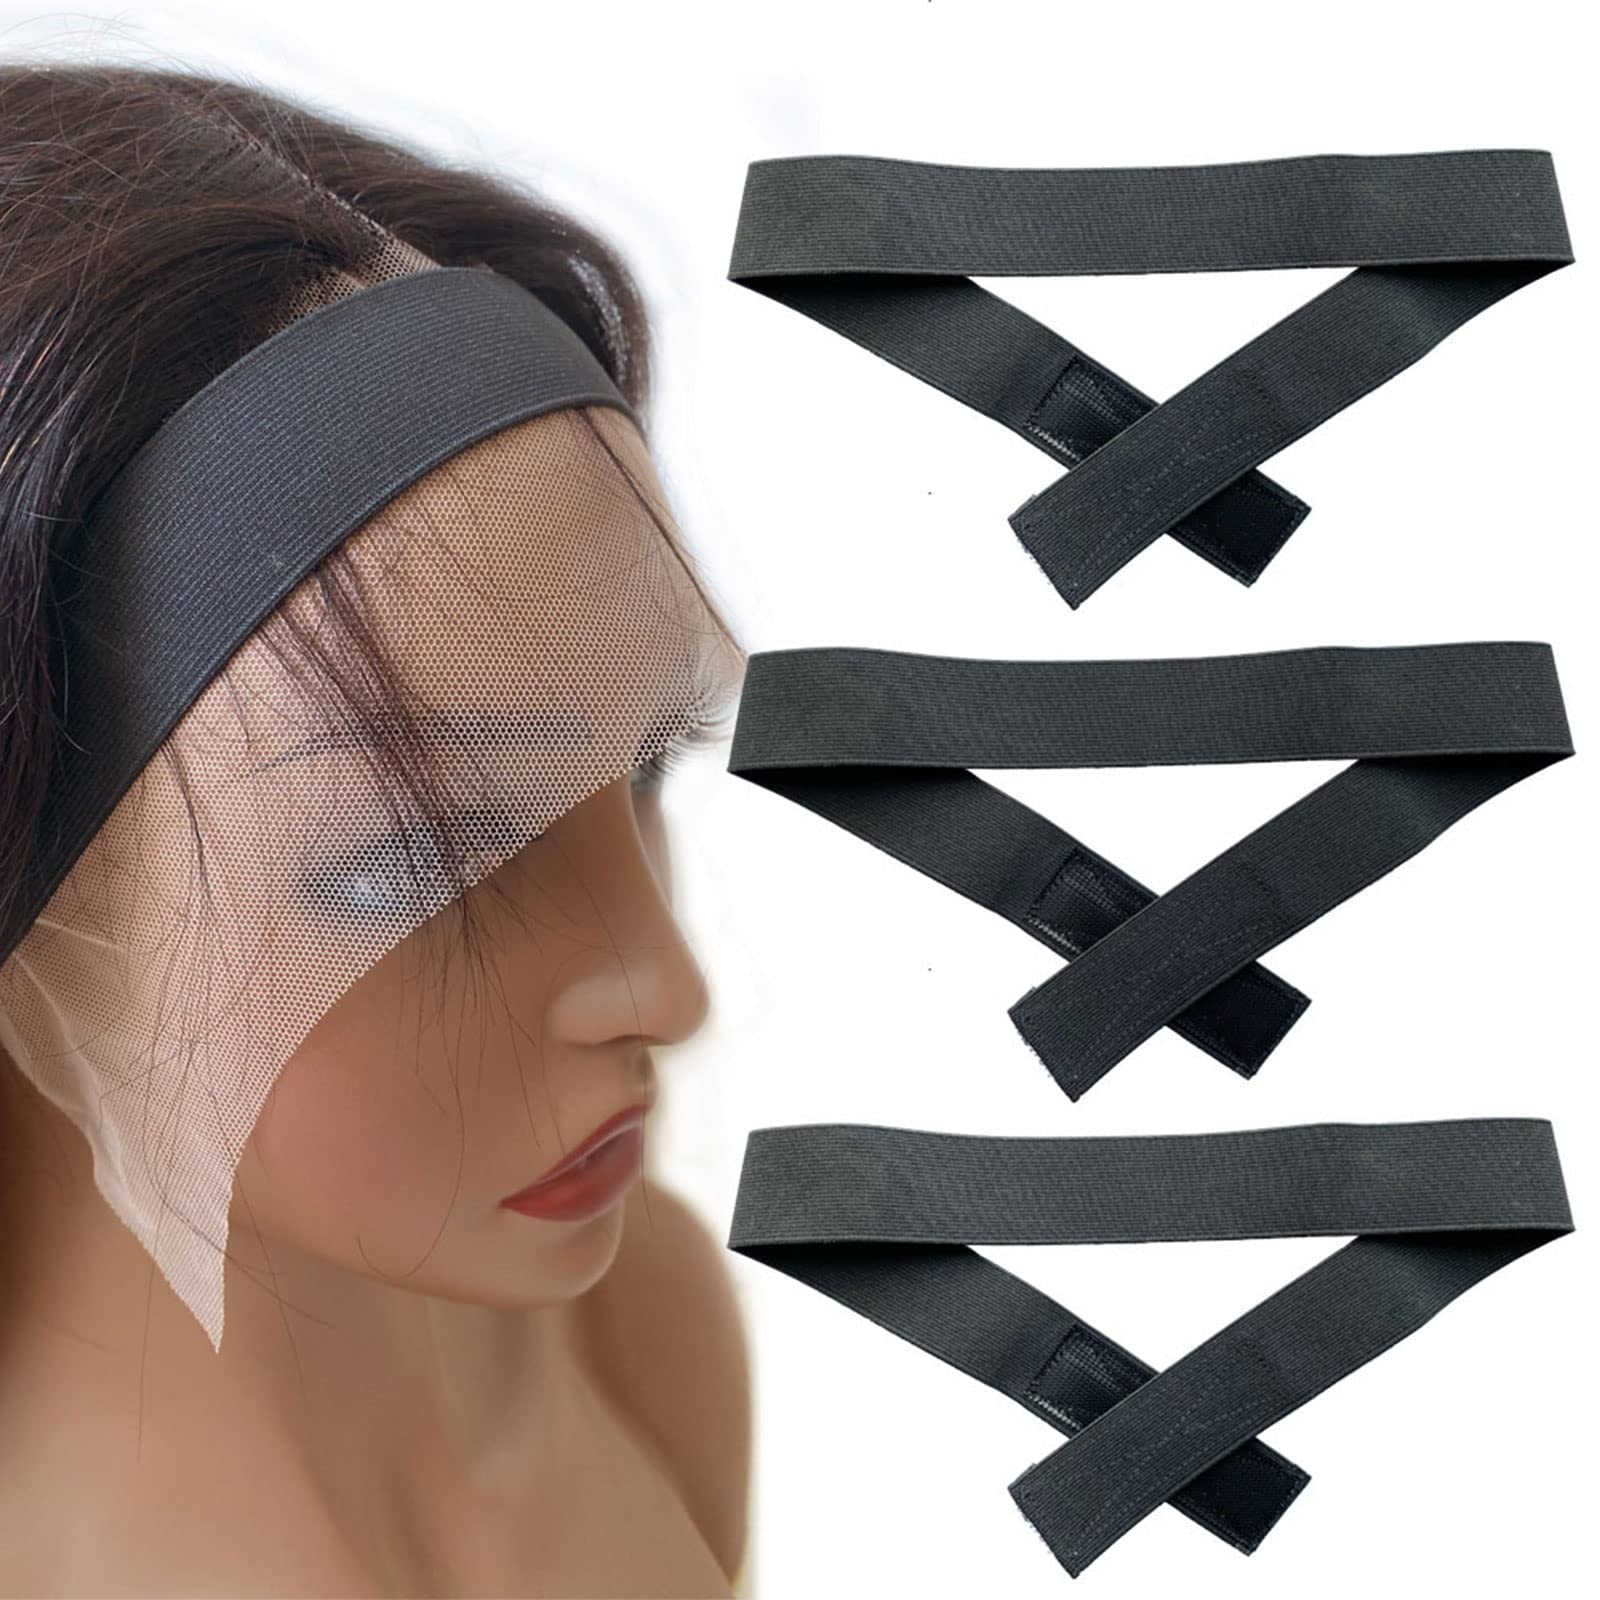  AIFIHIYI Elastic Bands For Wig, Adjustable Lace